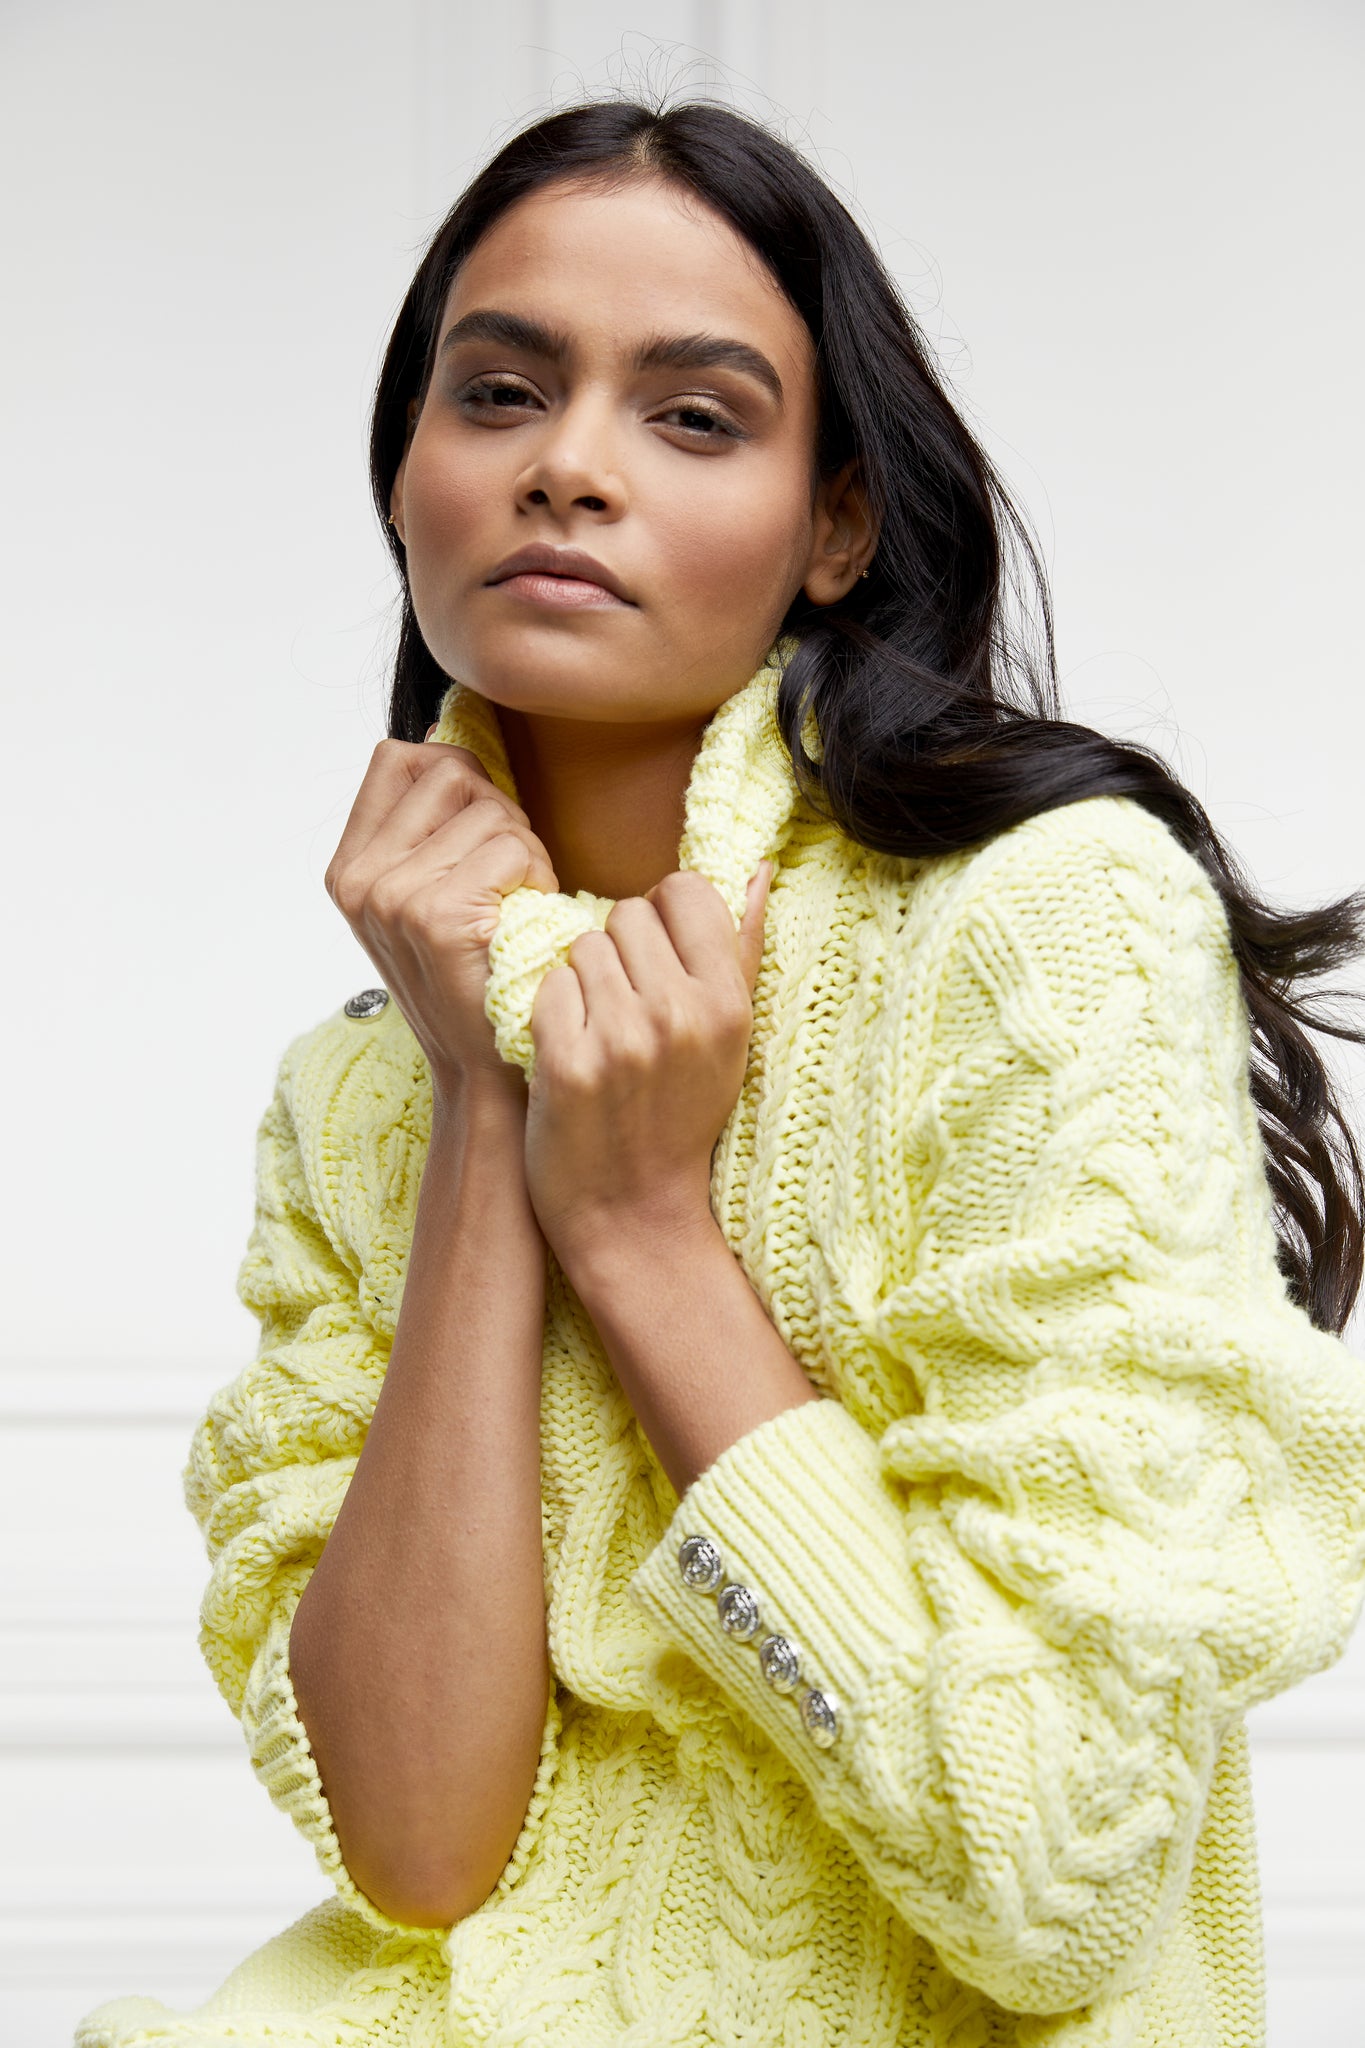 chunky cable knit jumper in lemon yellow with ribbed roll neck hem and cuffs